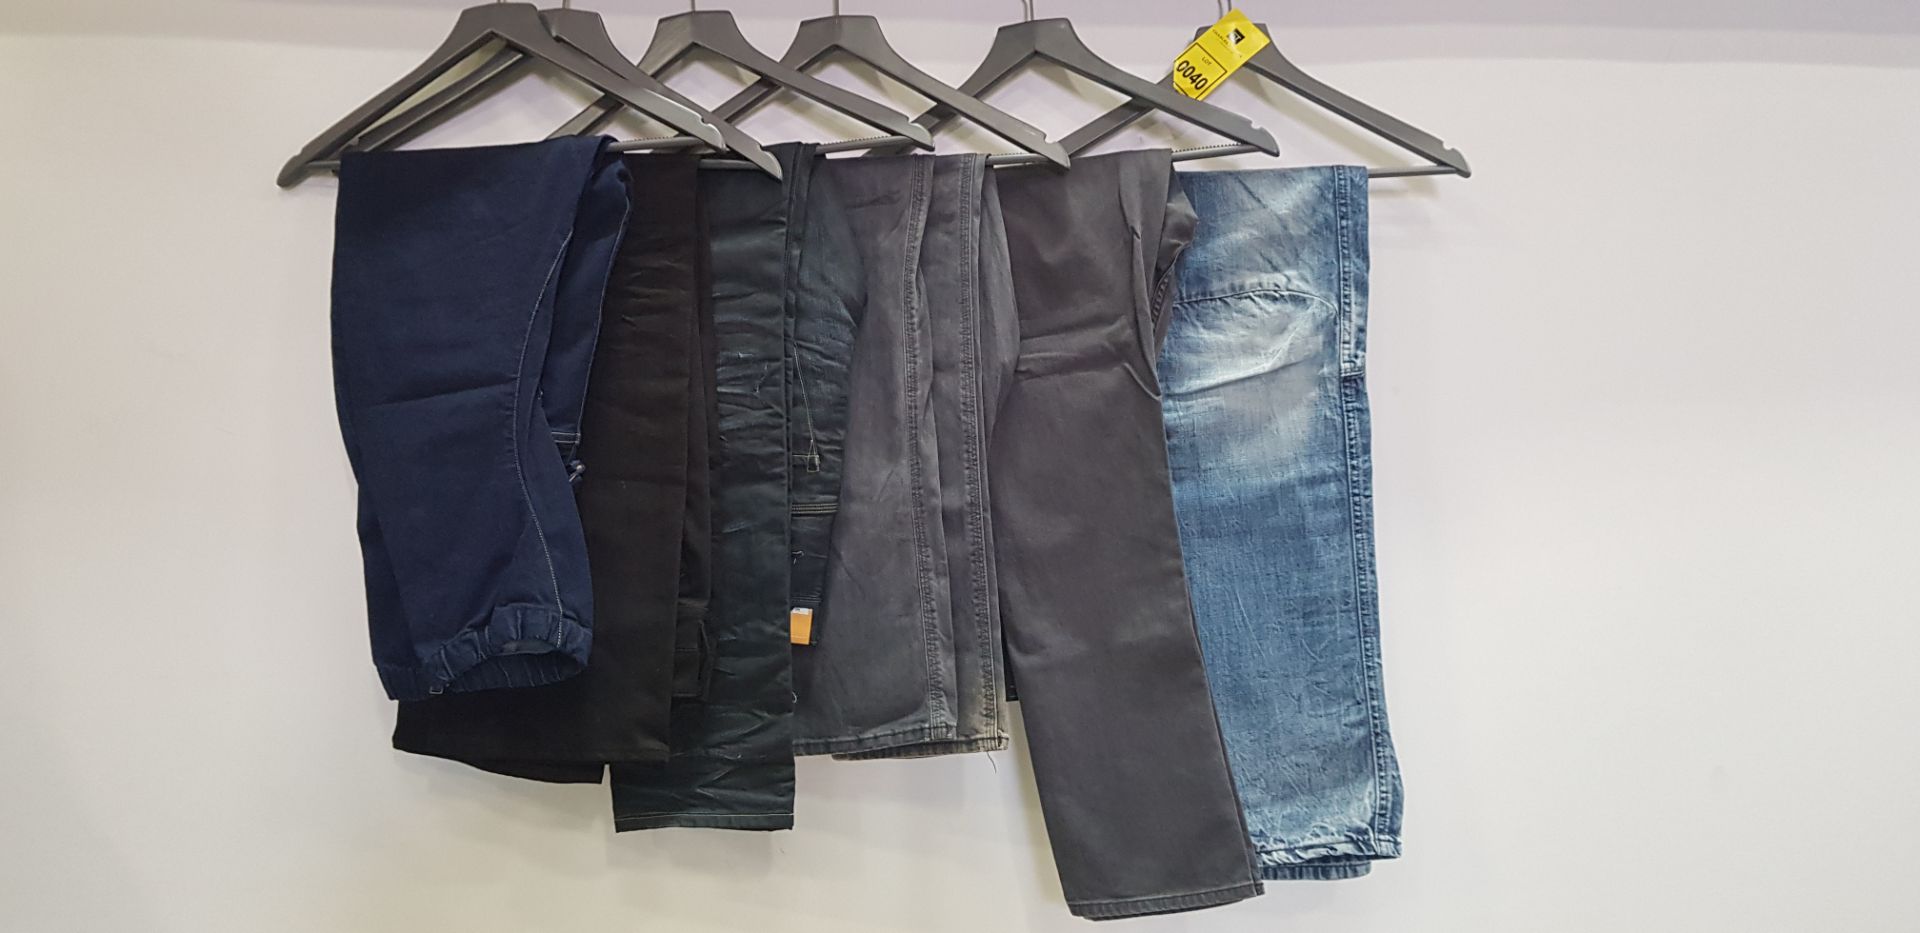 6 X BRAND NEW G-STAR RAW JEANS IN VARIOUS COLOURS (SIZE30)